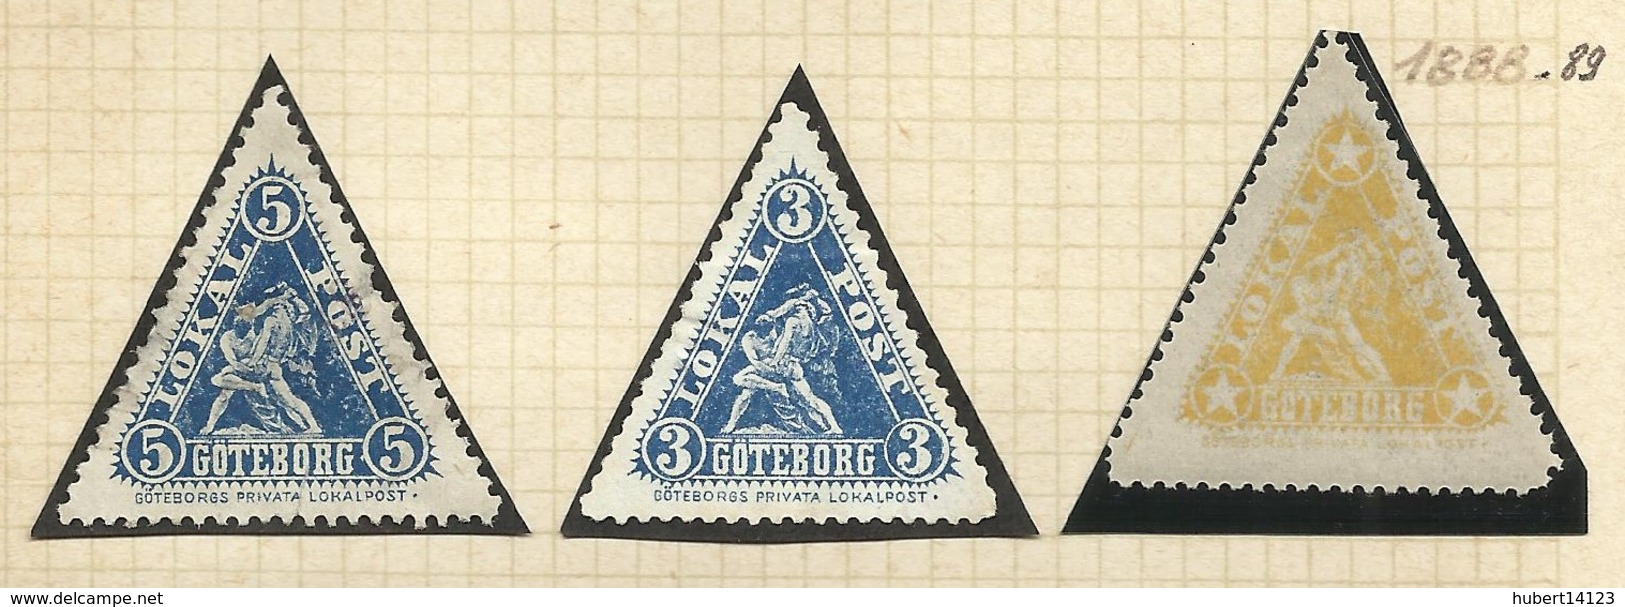 SUEDE SWENDEN GOTEBORG 1888 - Local Post Stamps